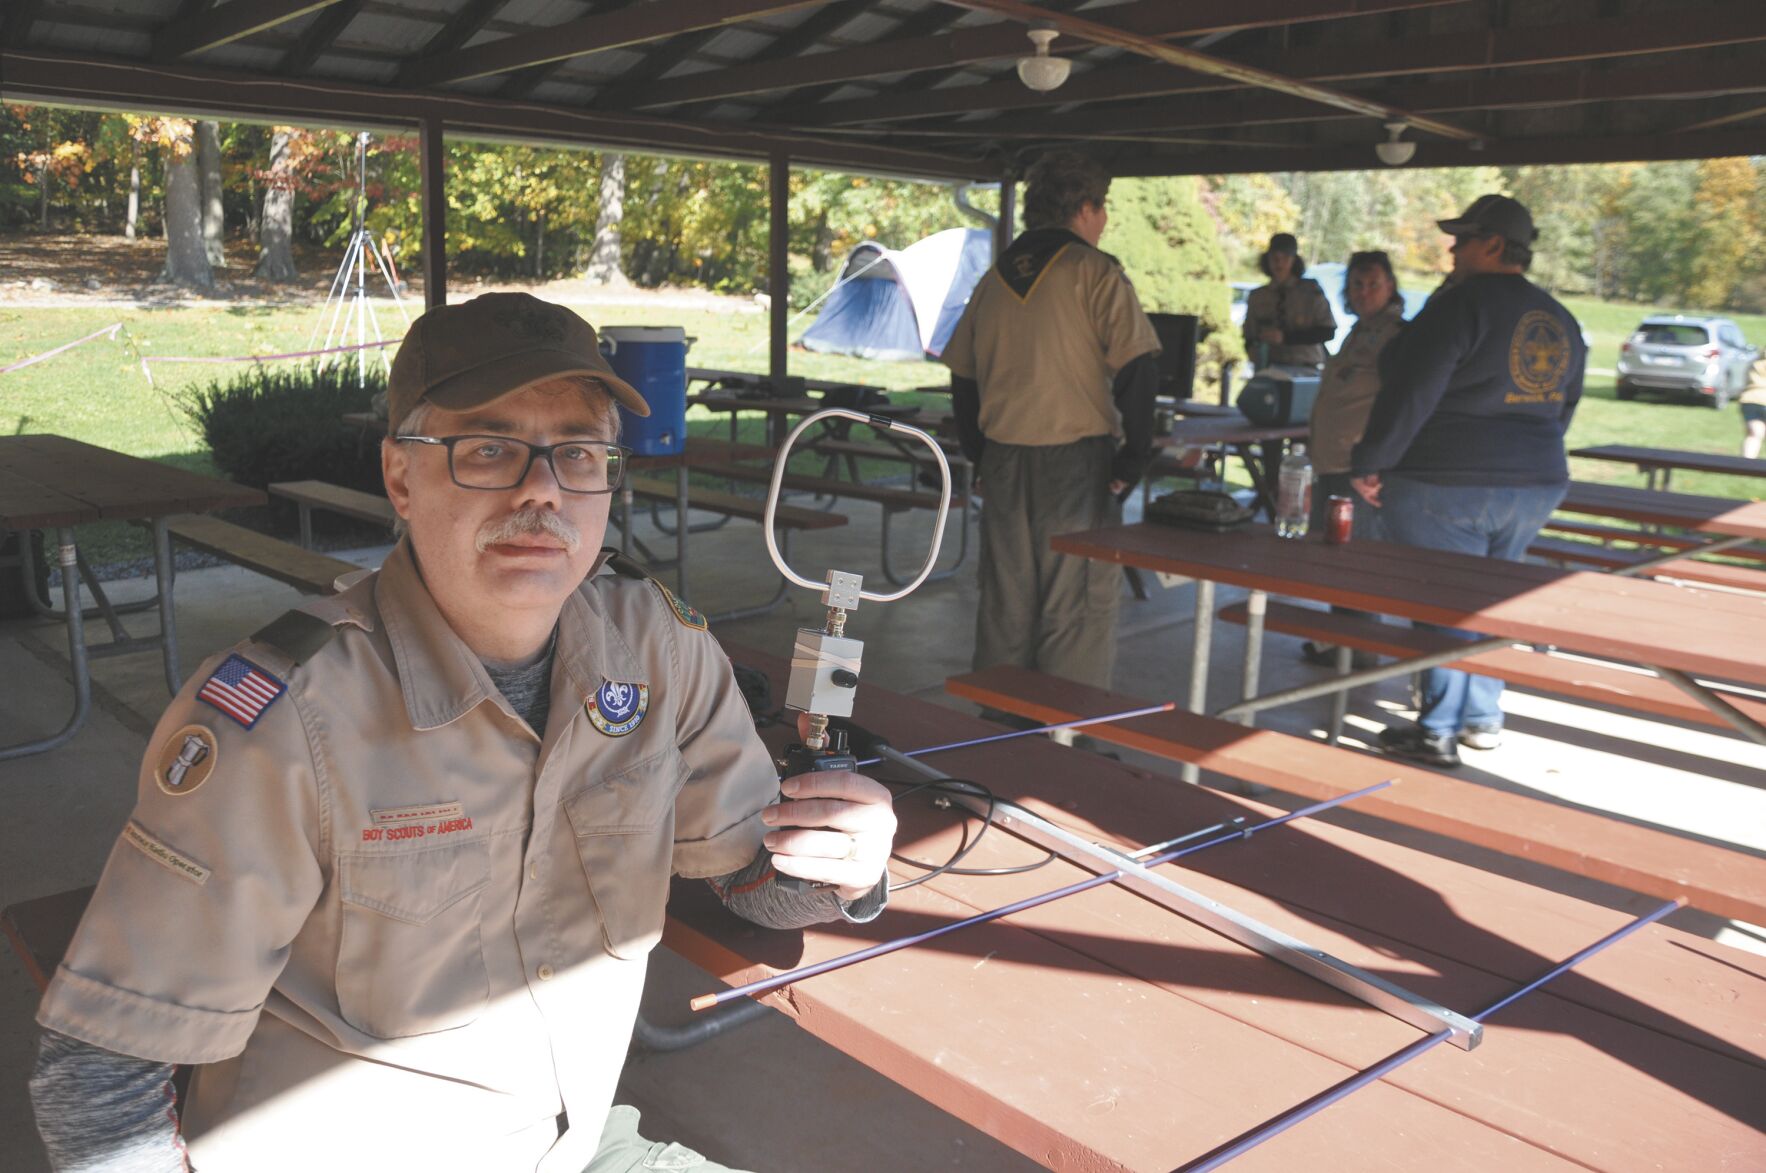 Scoutings Jamboree-on-the-Air comes to Danville News dailyitem